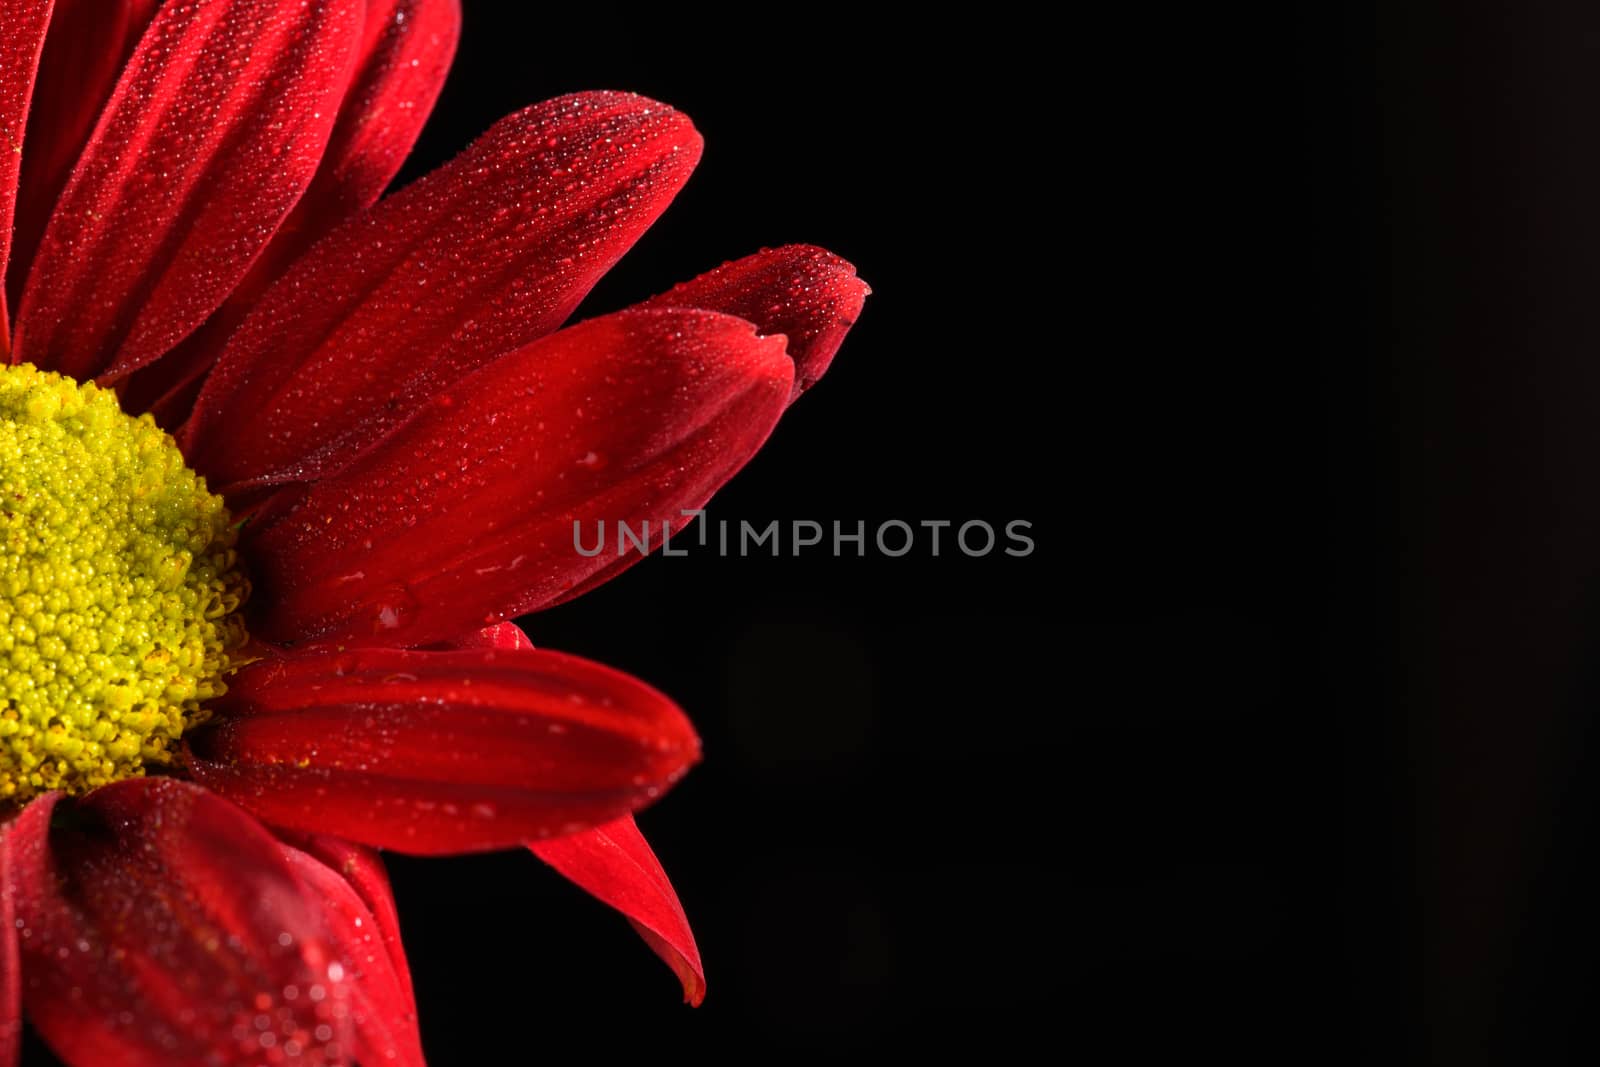 Flower isolated on a black background by andyperiam